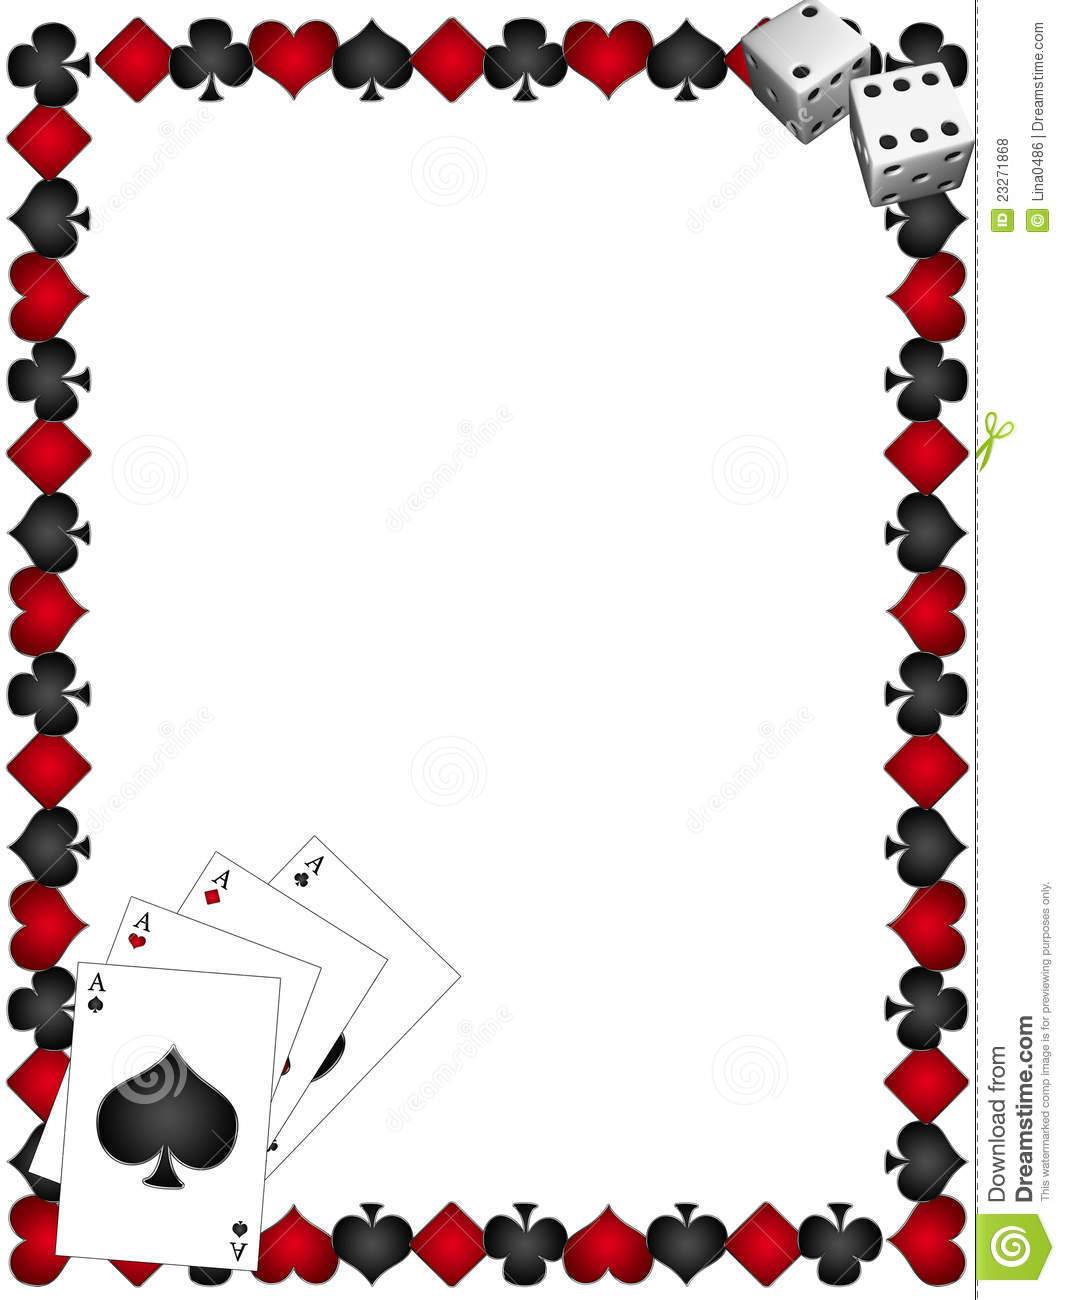 Playing Cards With Border Royalty Free Stock Photos   Image  23271868